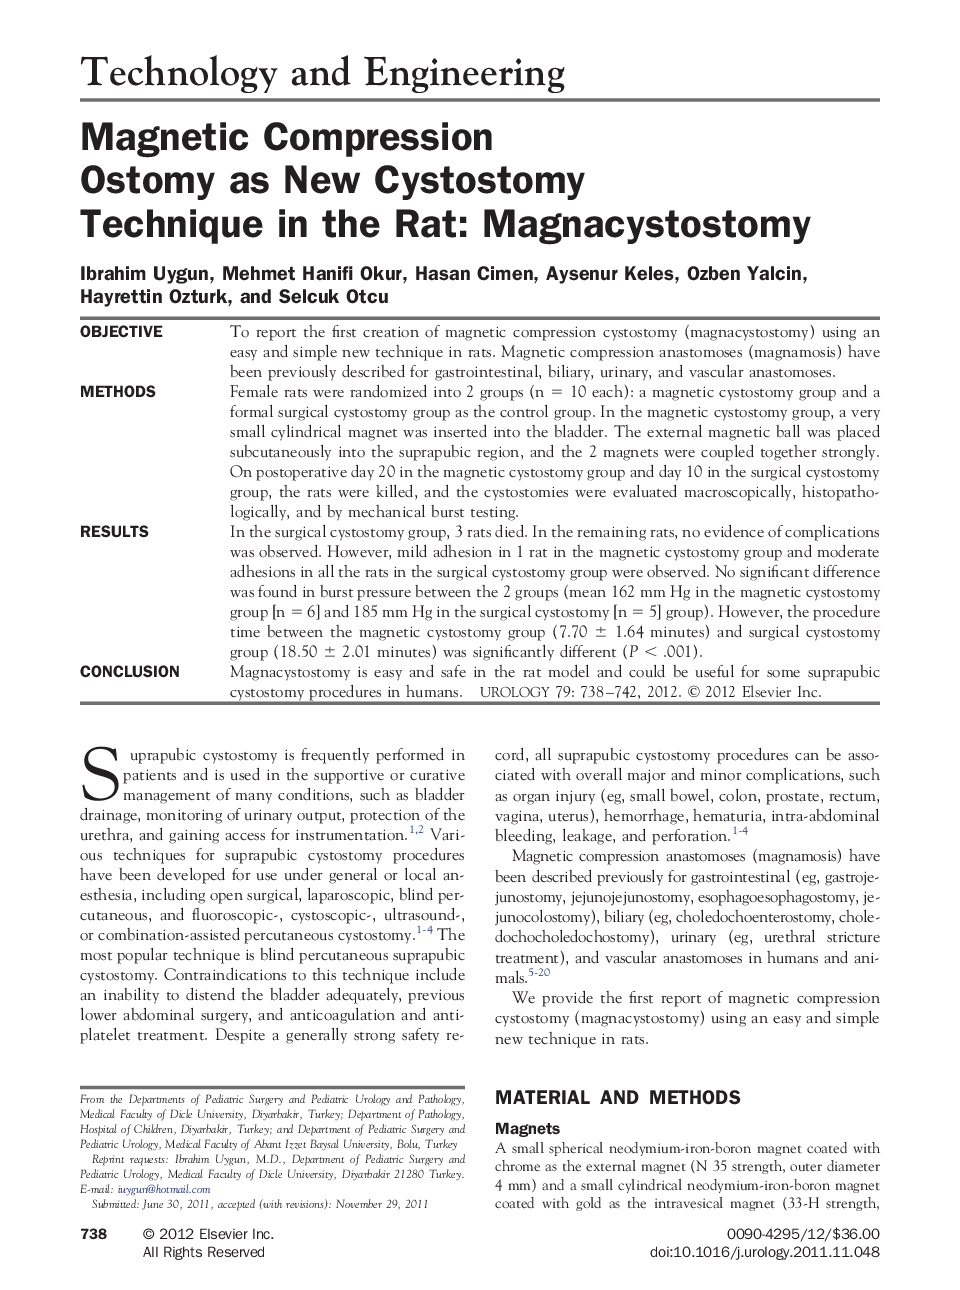 Magnetic Compression Ostomy as New Cystostomy Technique in the Rat: Magnacystostomy